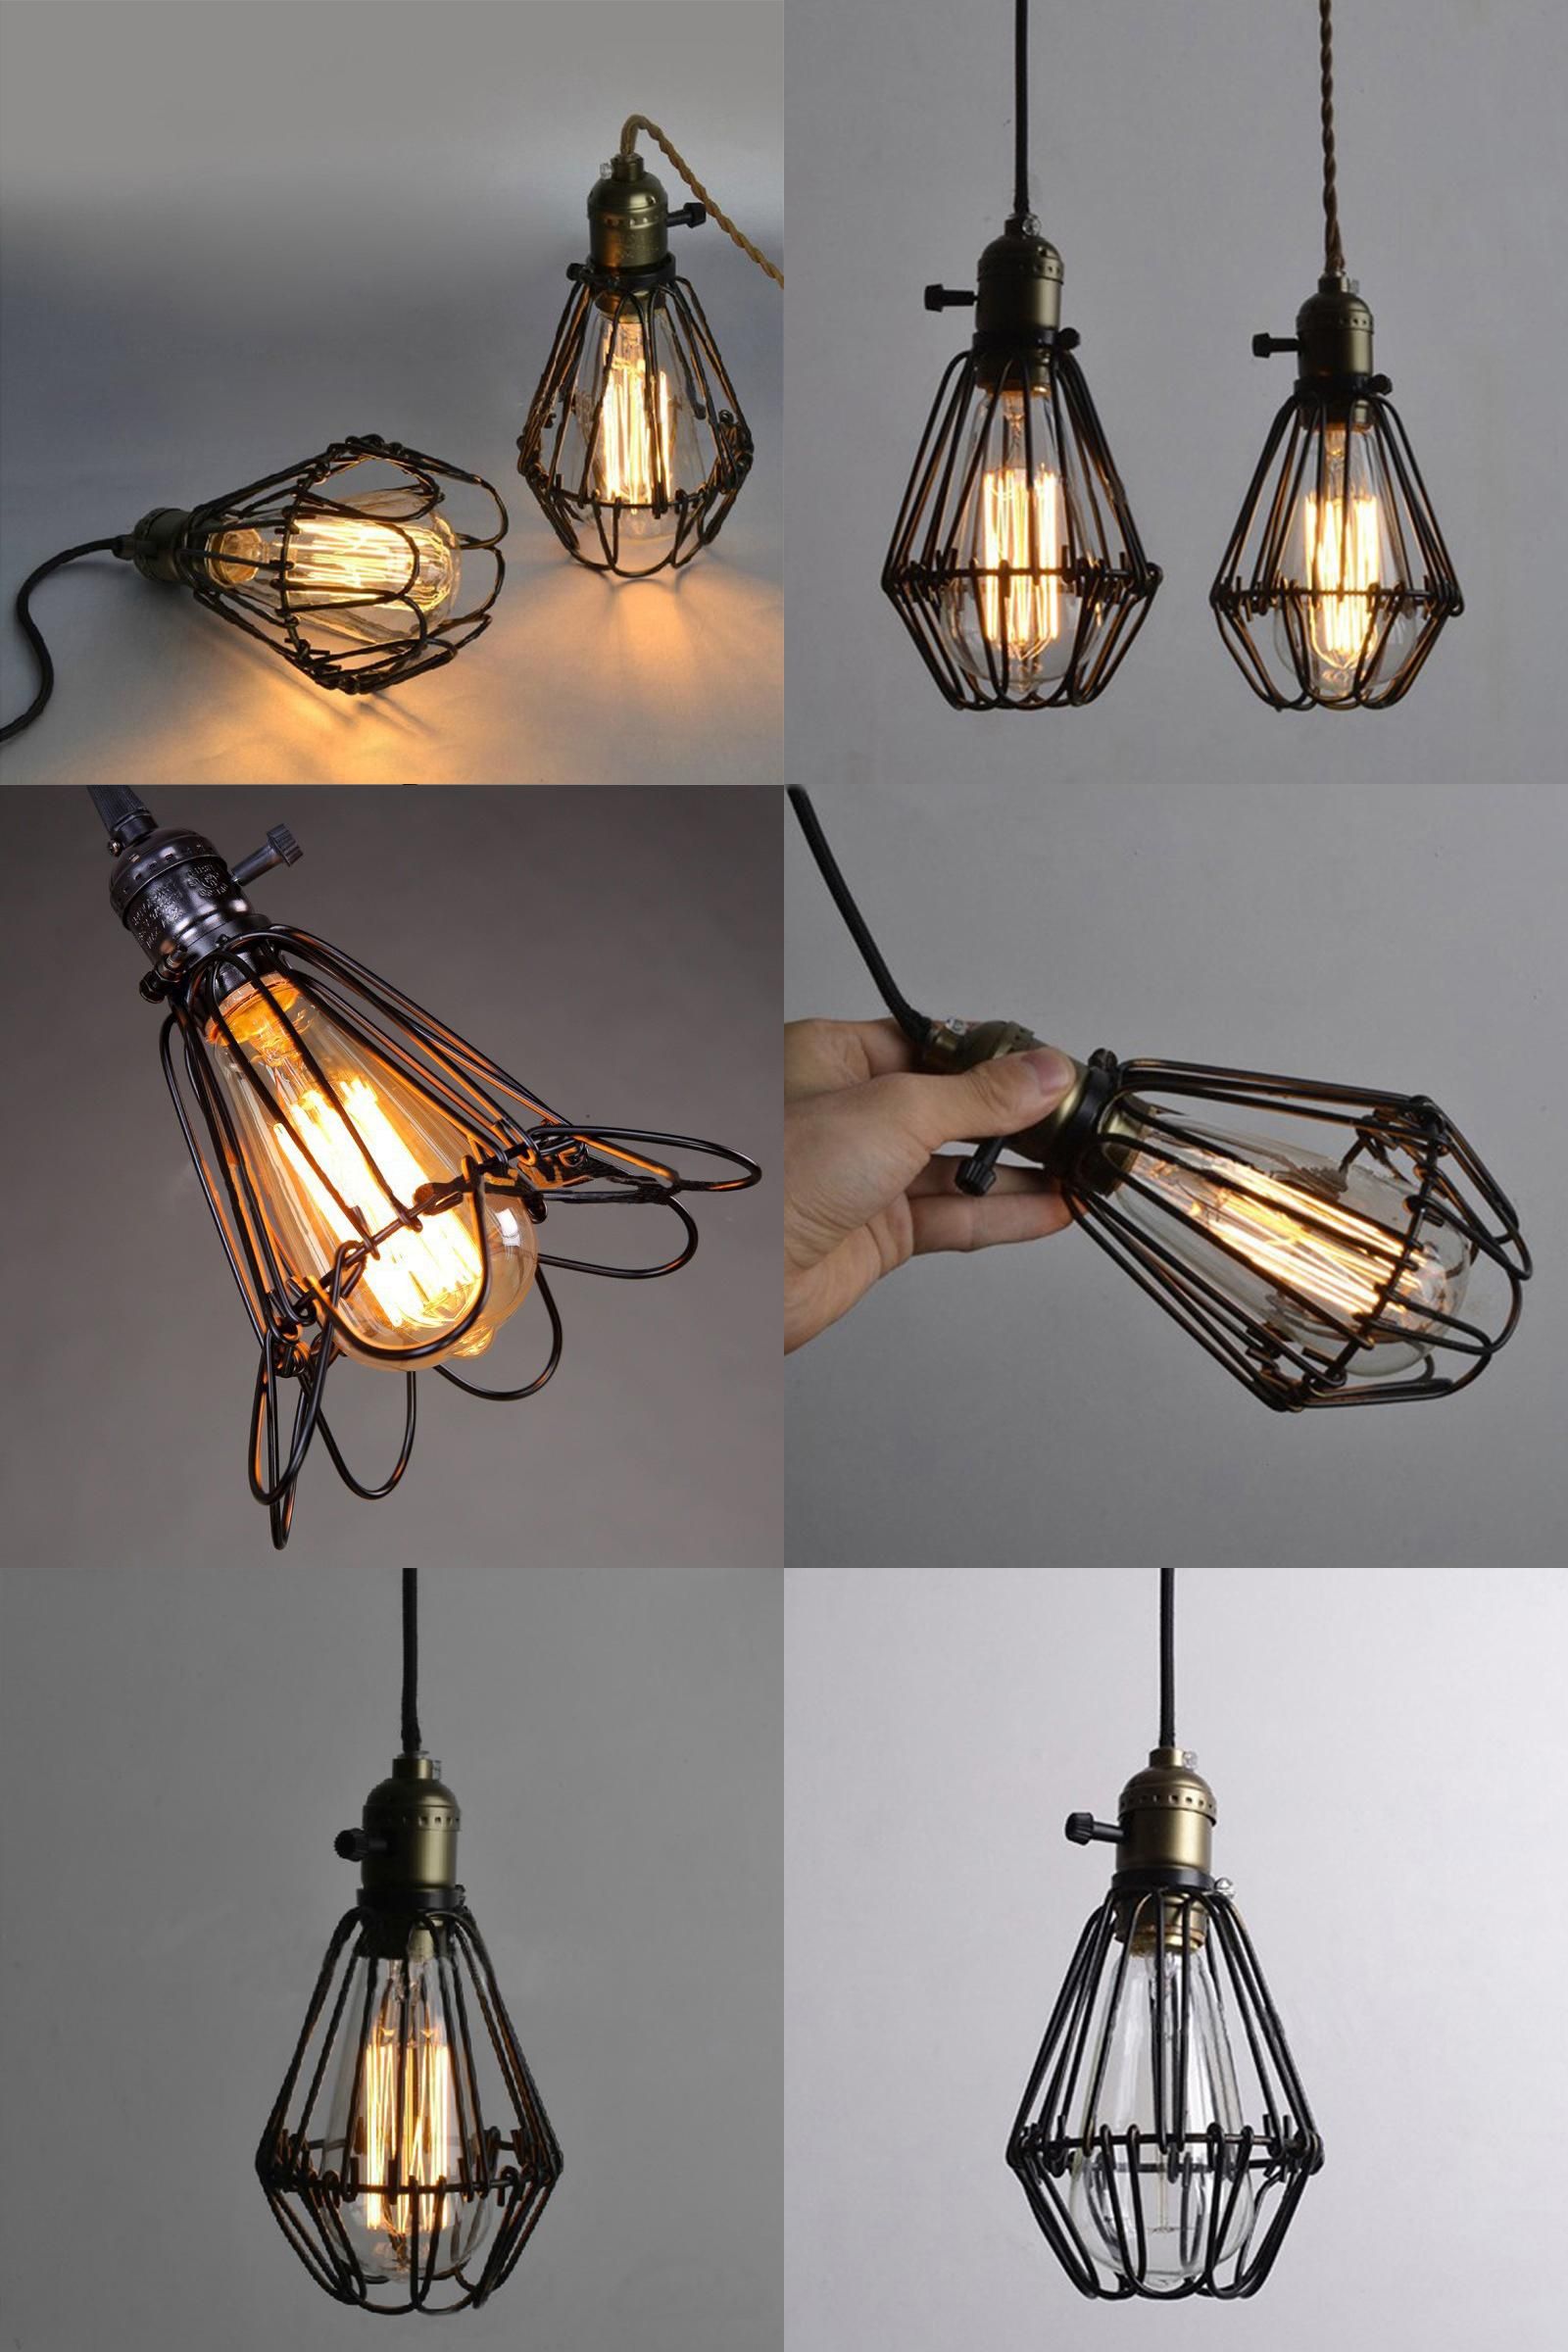 Visit to Buy] FRLED Fashion Vintage Wire Lamp Cage DIY Lampshade ...